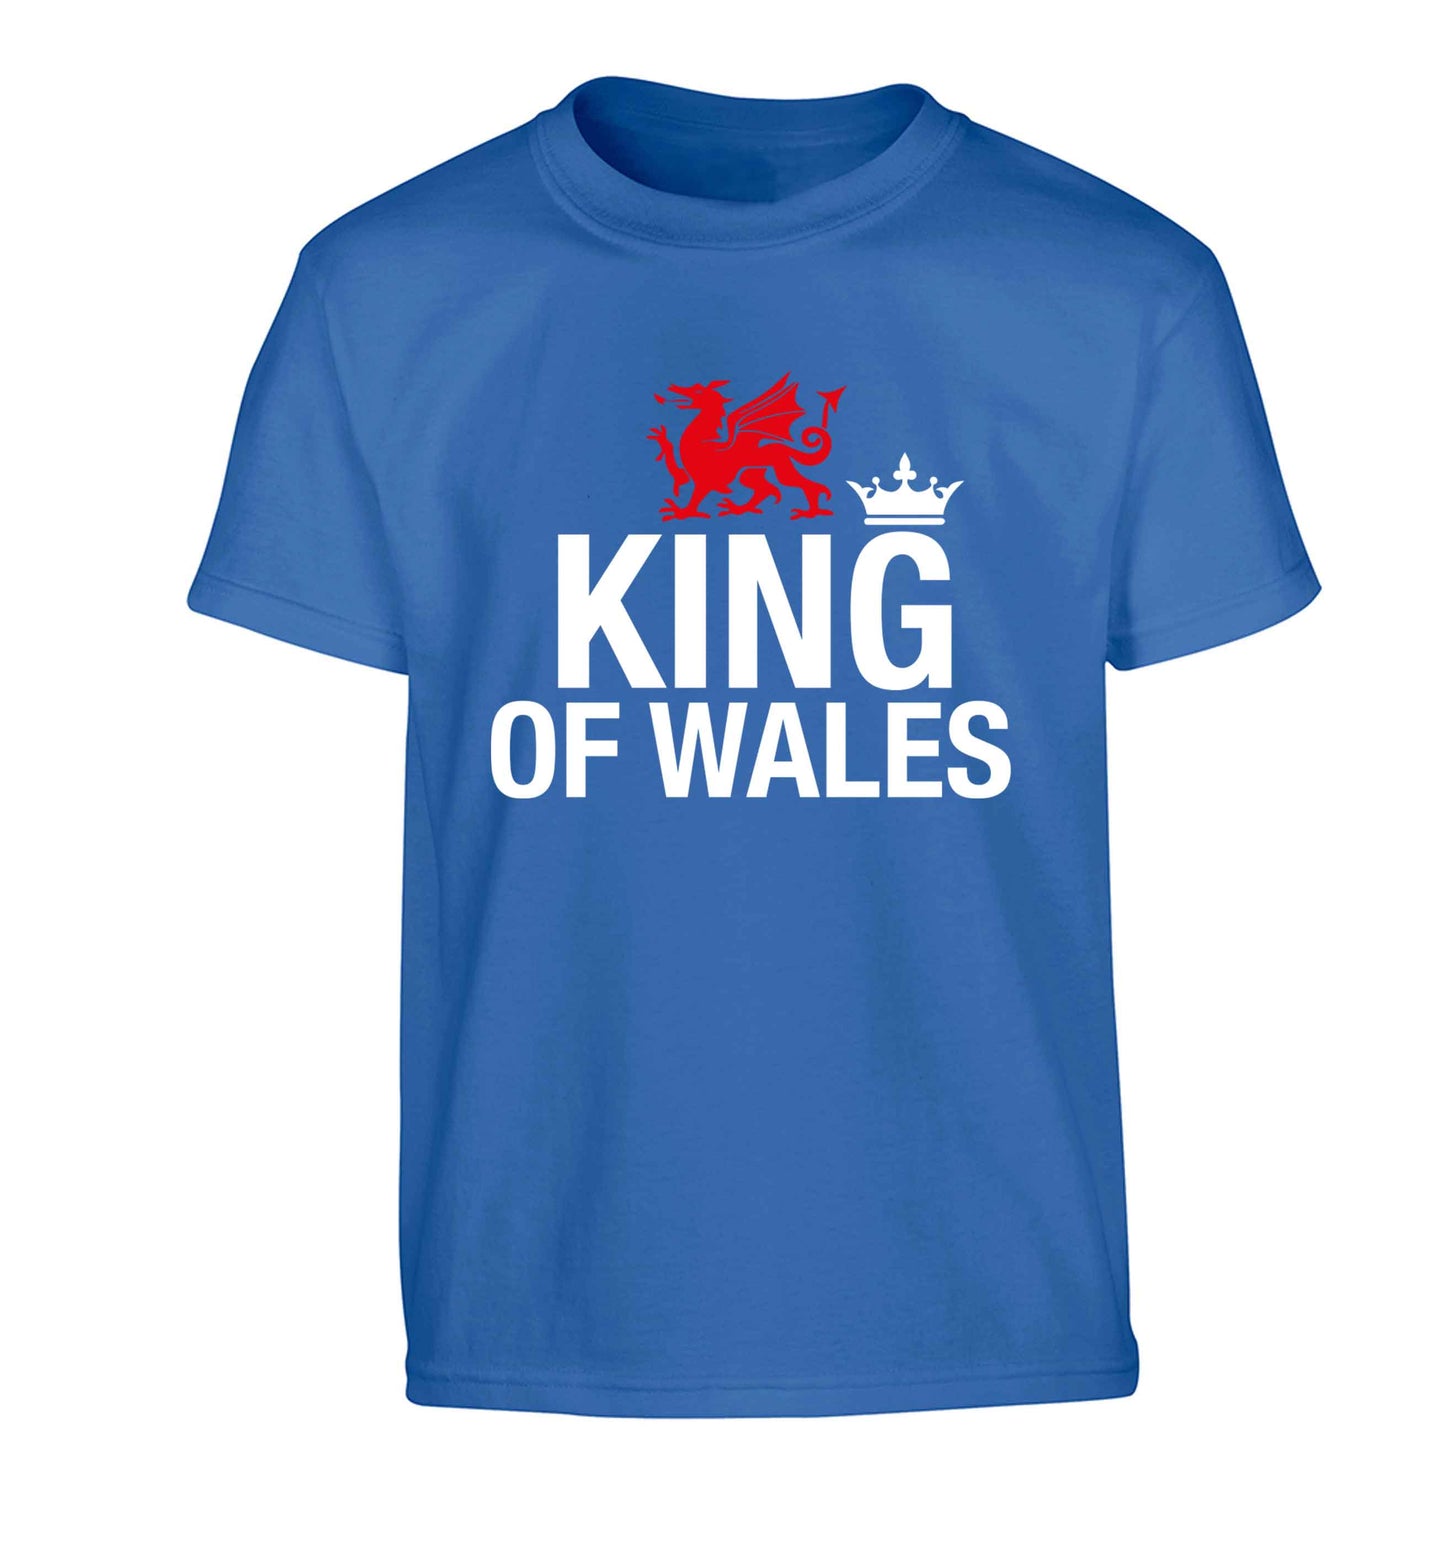 King of Wales Children's blue Tshirt 12-13 Years